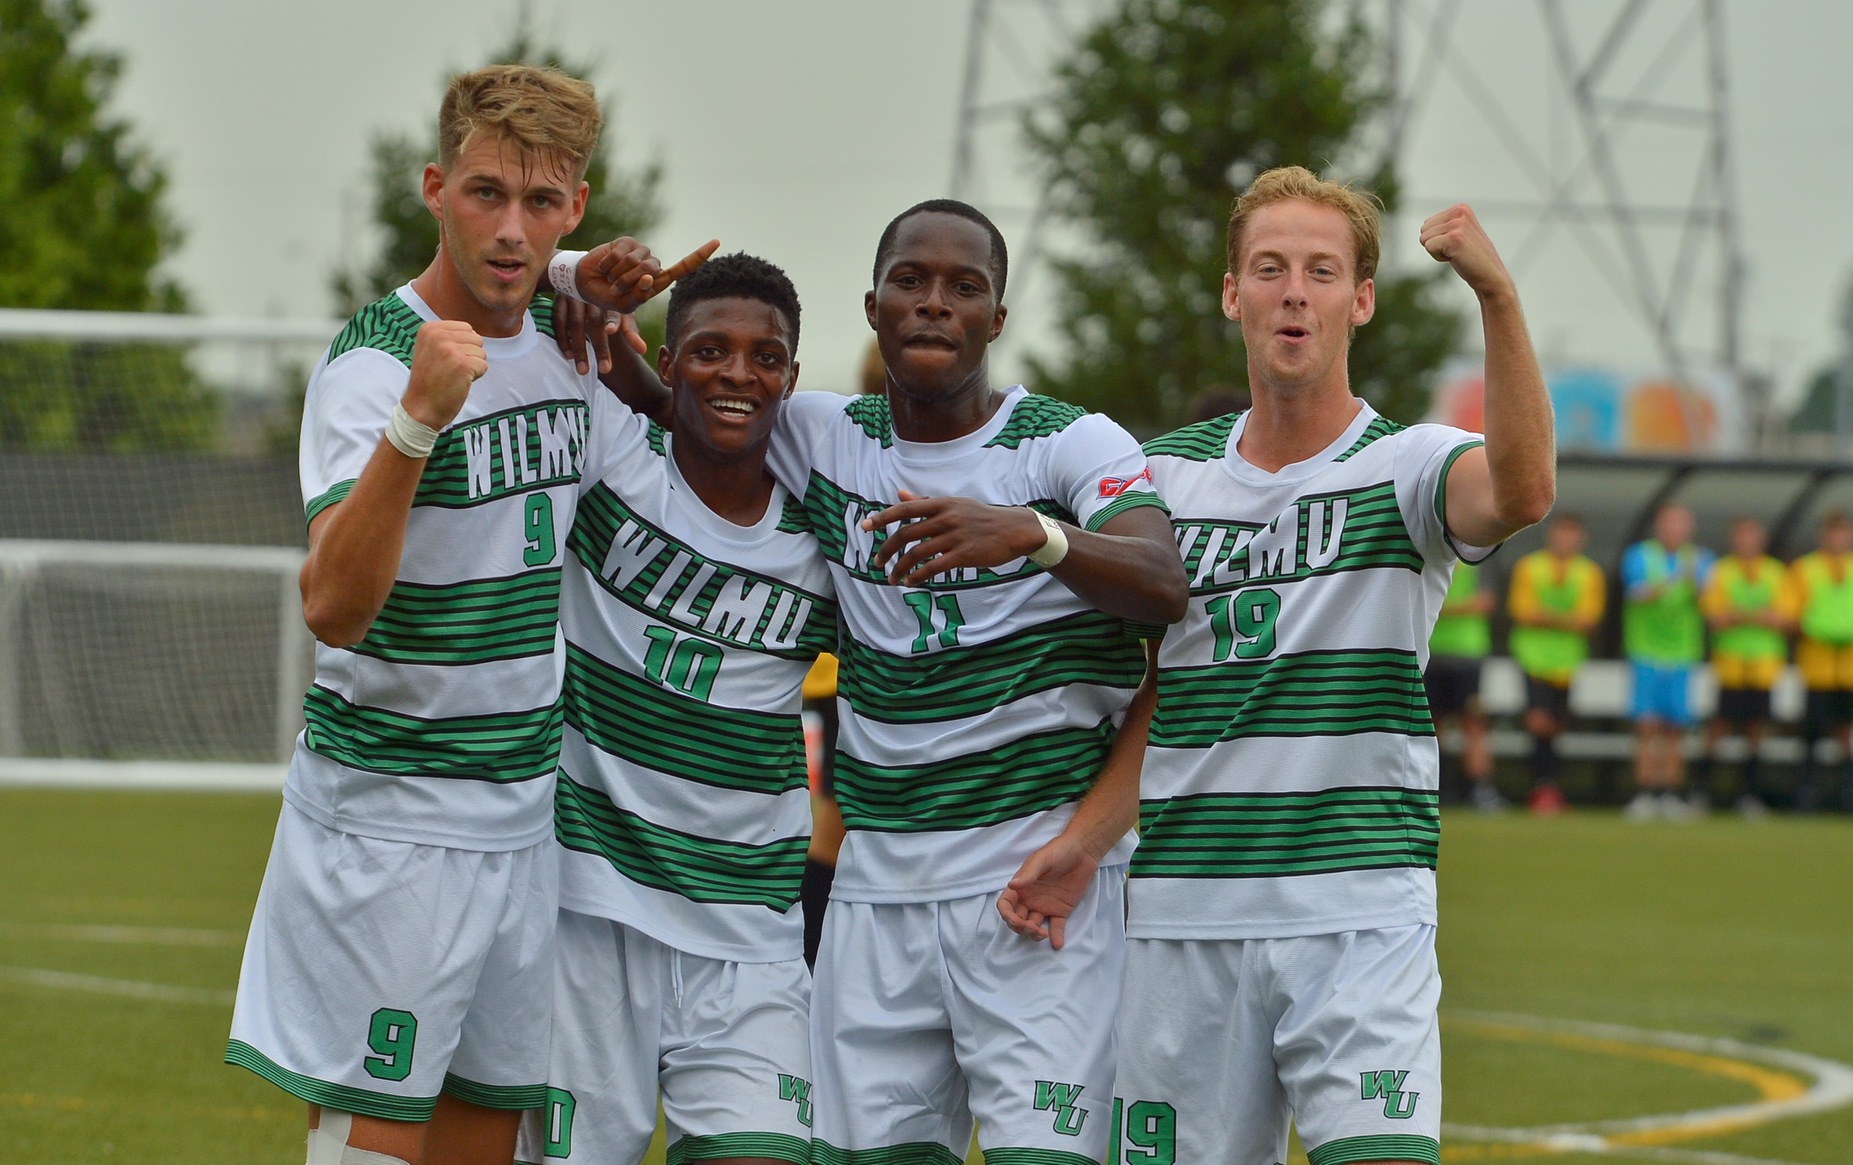 Left to right: Lorne Bickley, Shawn Genus, Abdul Mansaray, and Fredrik Bentdal after going up 2-0. Copyright 2019; Wilmington University. All rights reserved. Photo by James Jones. Thursday, September 5 vs. Millersville.